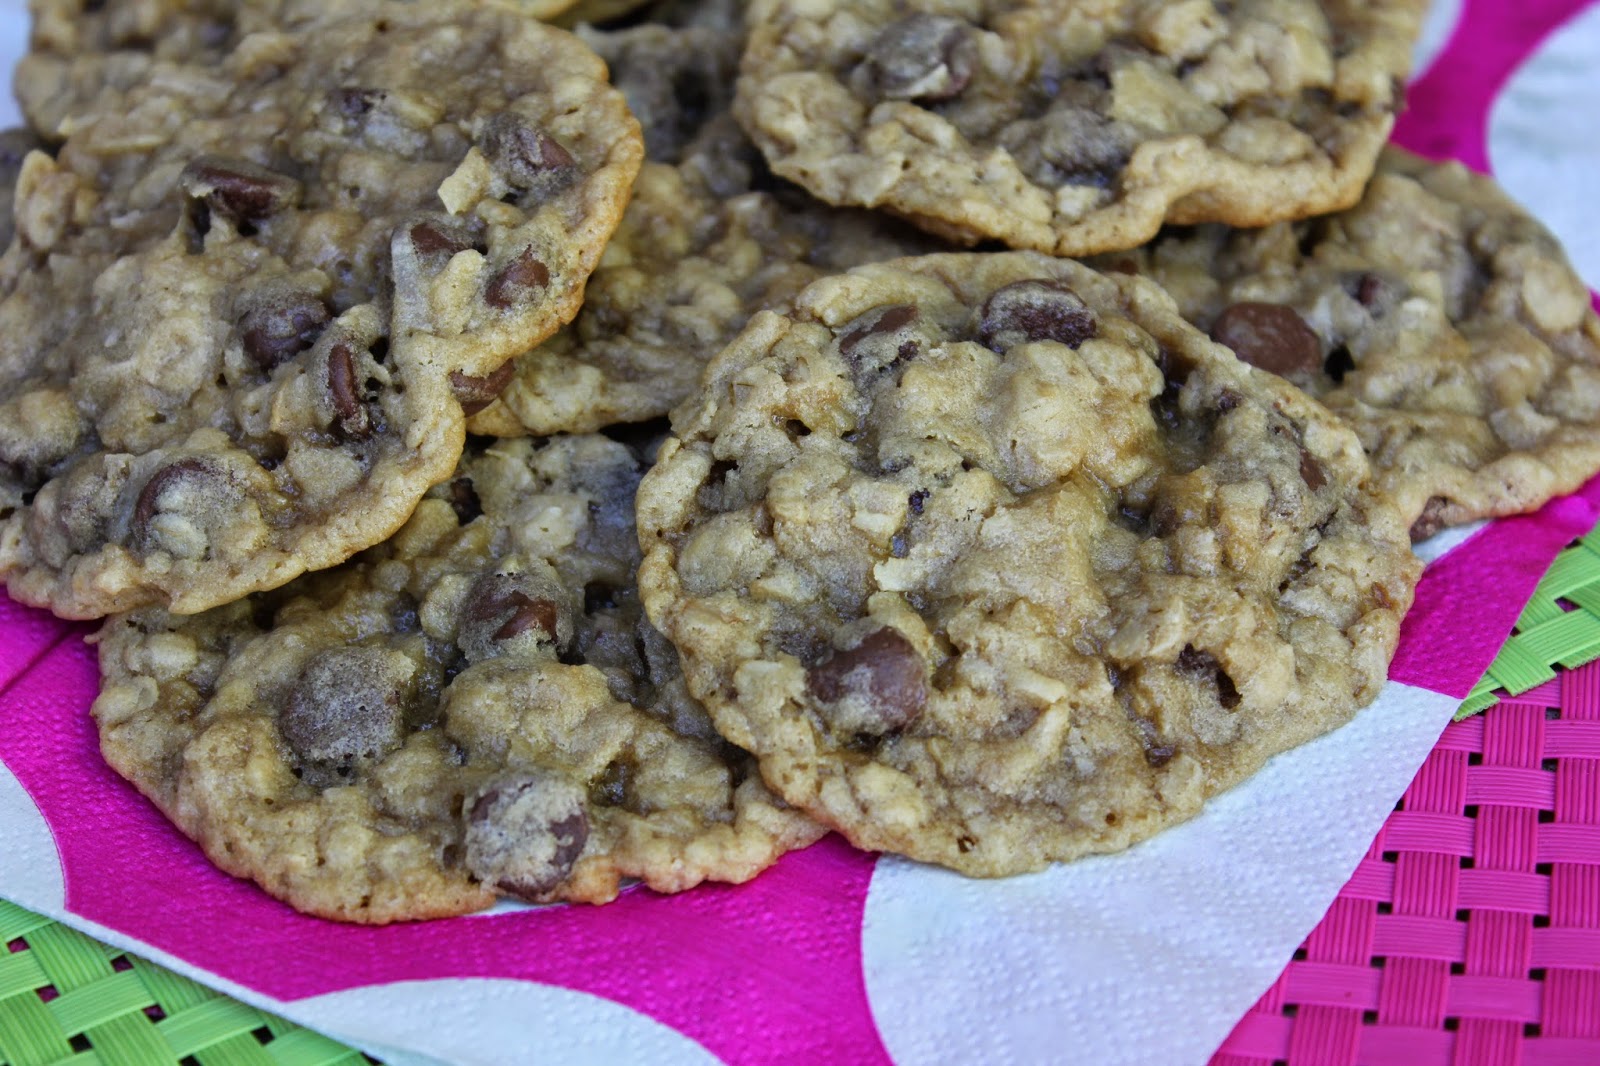 Recipe: Cookie, Recipe: Chocolate, healthier cookie recipe, favorite chocolate chip cookie, Recipe: Dessert, Deals to Meals, Recipe: Oats, Recipe: Grains, Chewy Coconut Chocolate Chip Cookies